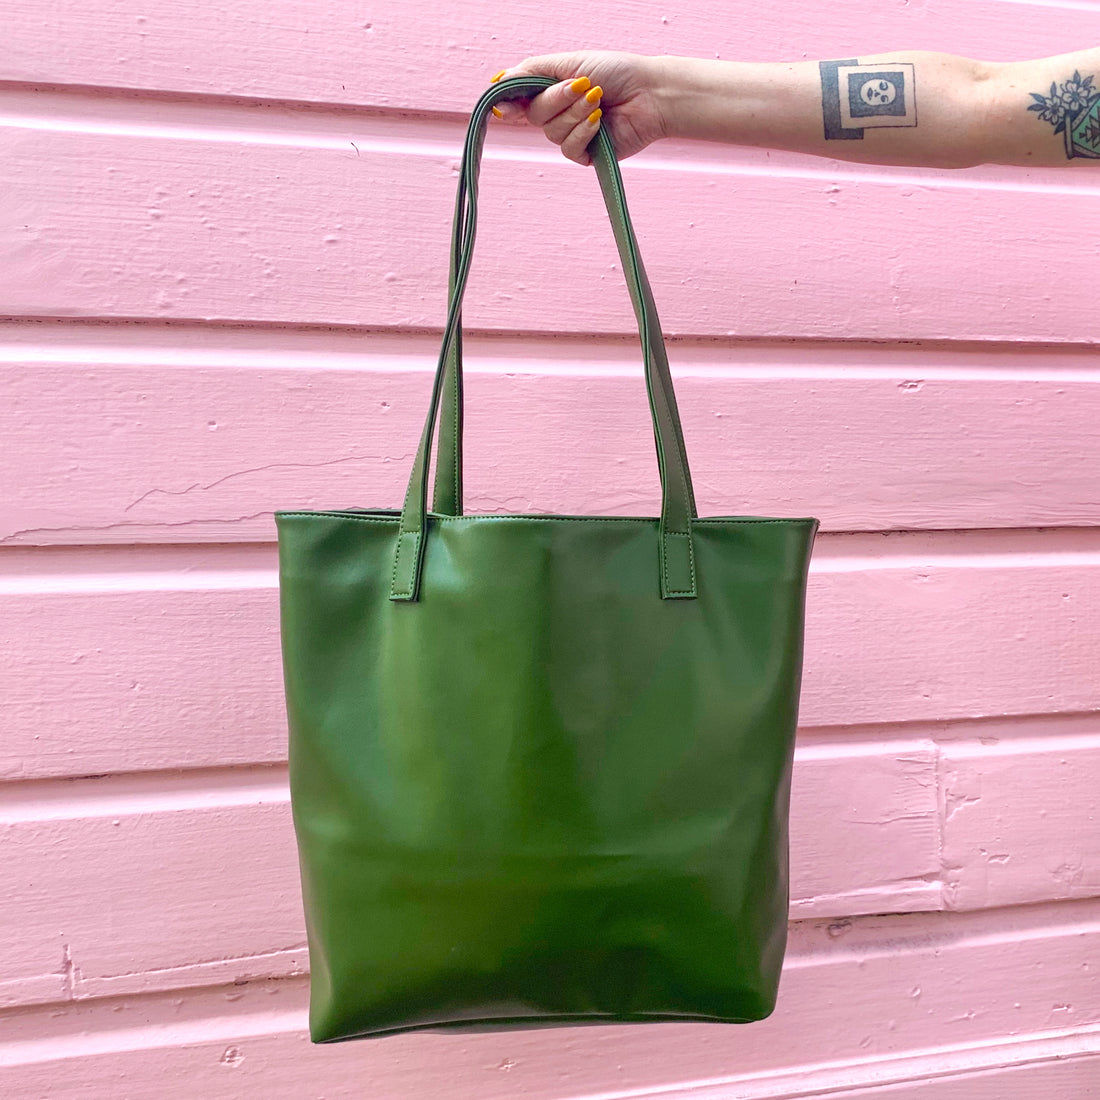 A green vegan cactus leather tote bag against a pink wall